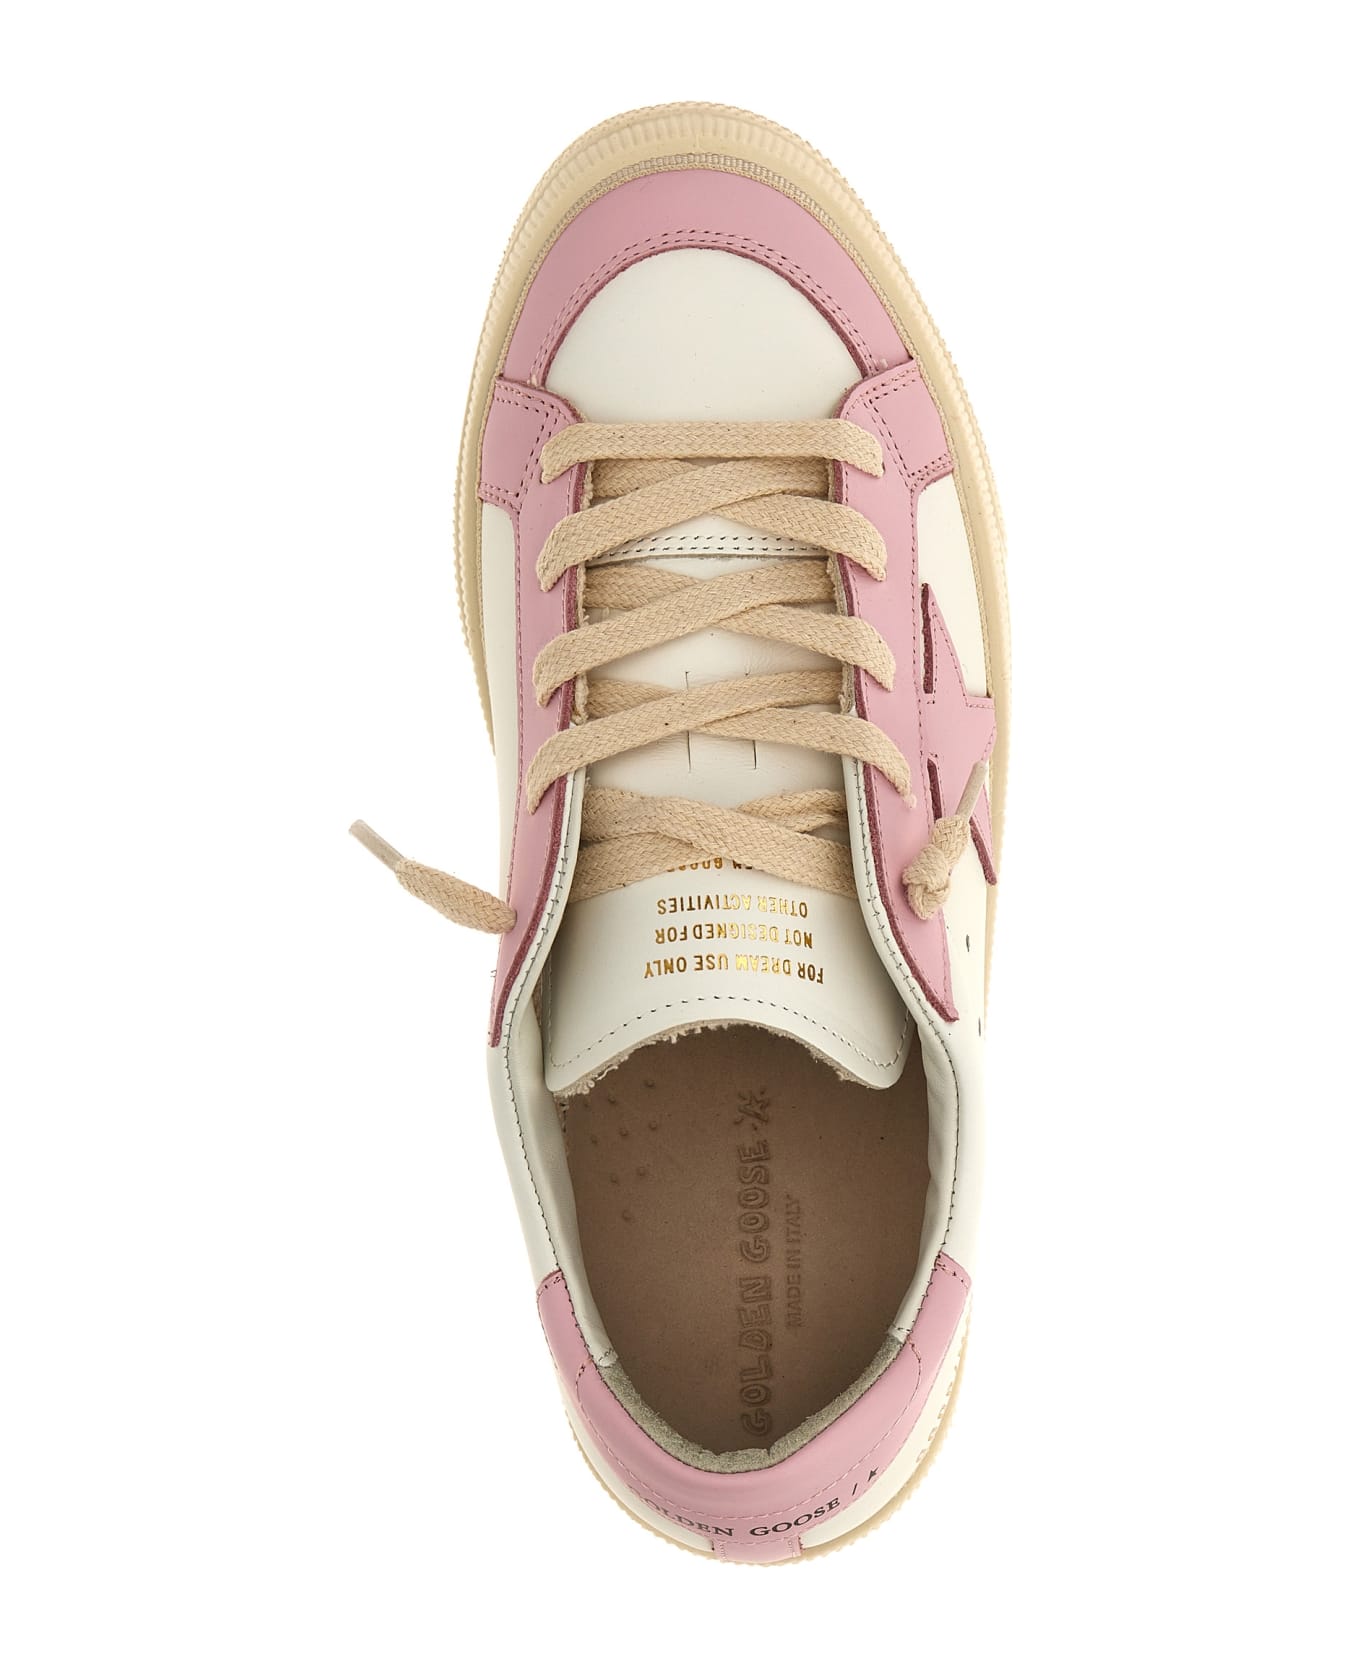 Golden Goose 'may With Double Toe' Sneakers - Pink